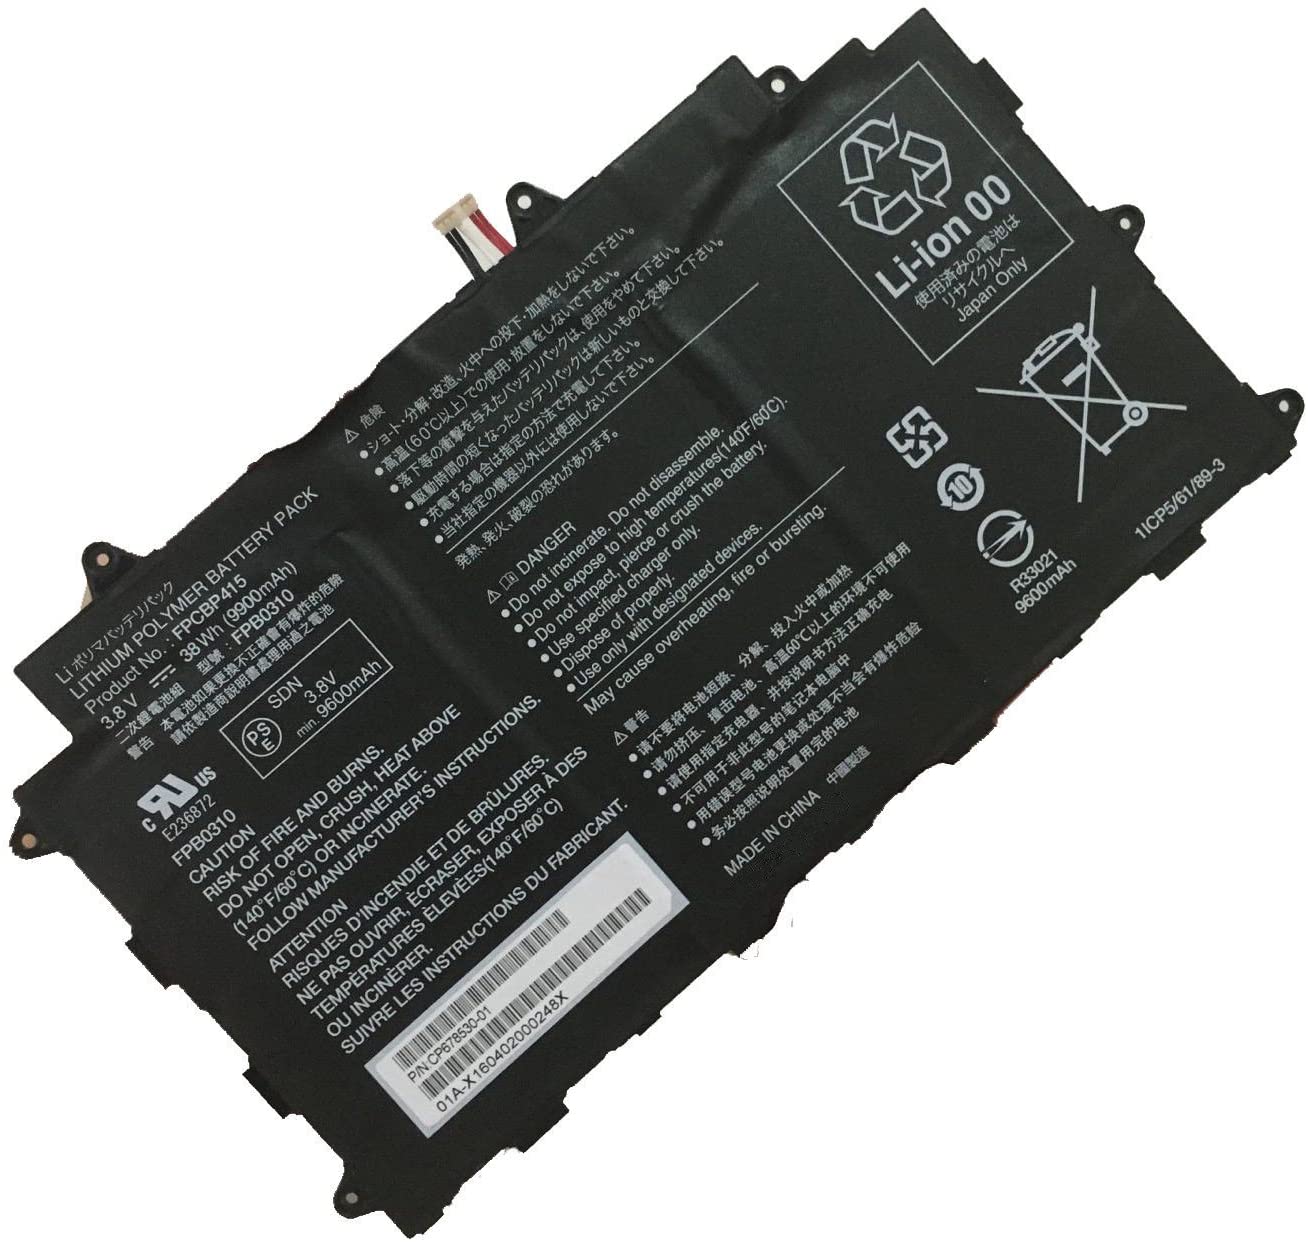 Replacement Battery for Fujitsu Fujitsu Stylistic Q555 Series Tablet battery